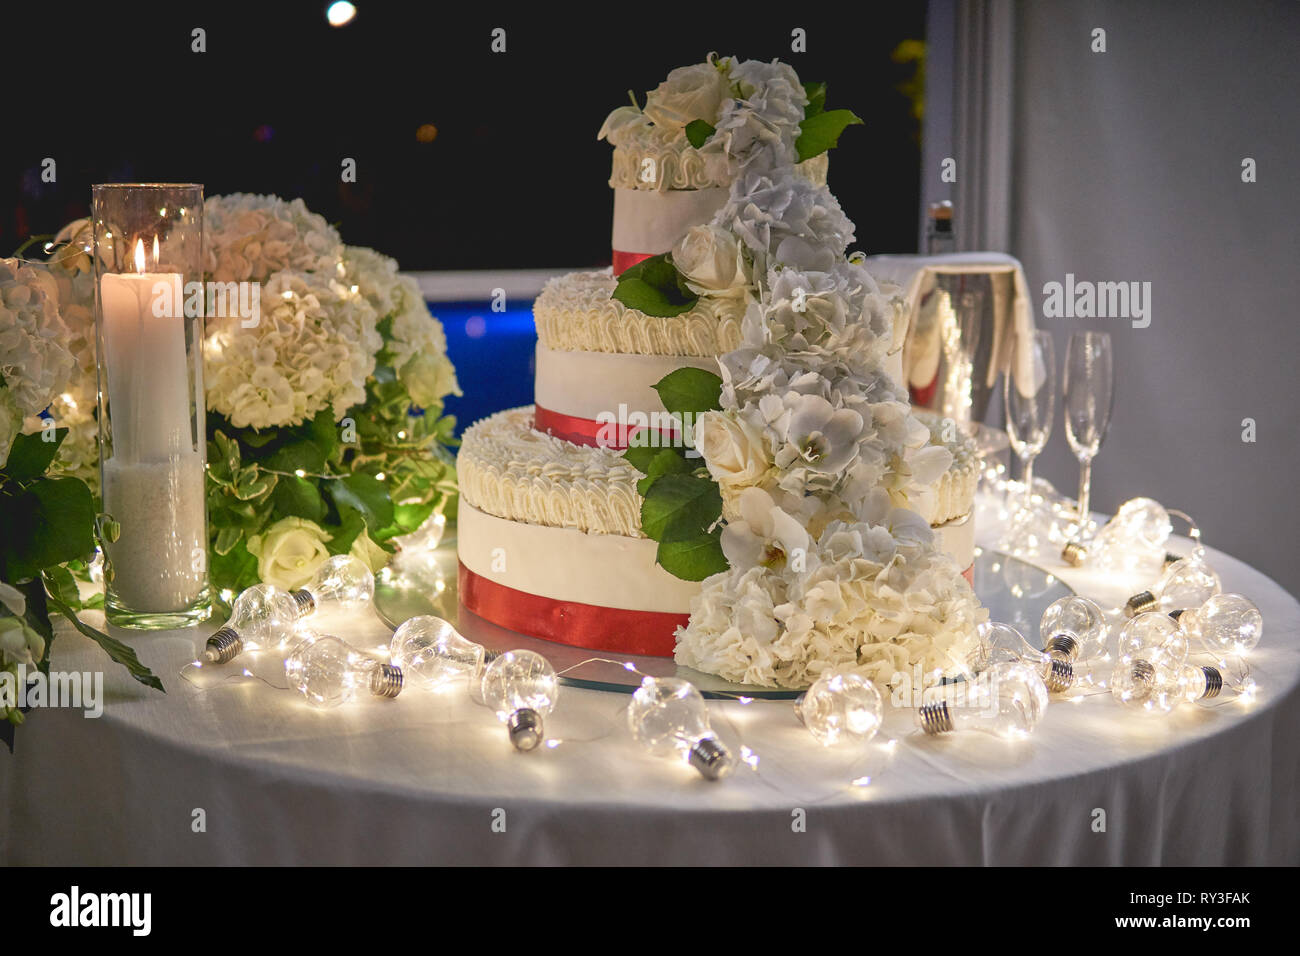 A three-tiers white wedding cake with rose decors on a table decorated with white candles and light bulbs. Landscape format. Stock Photo